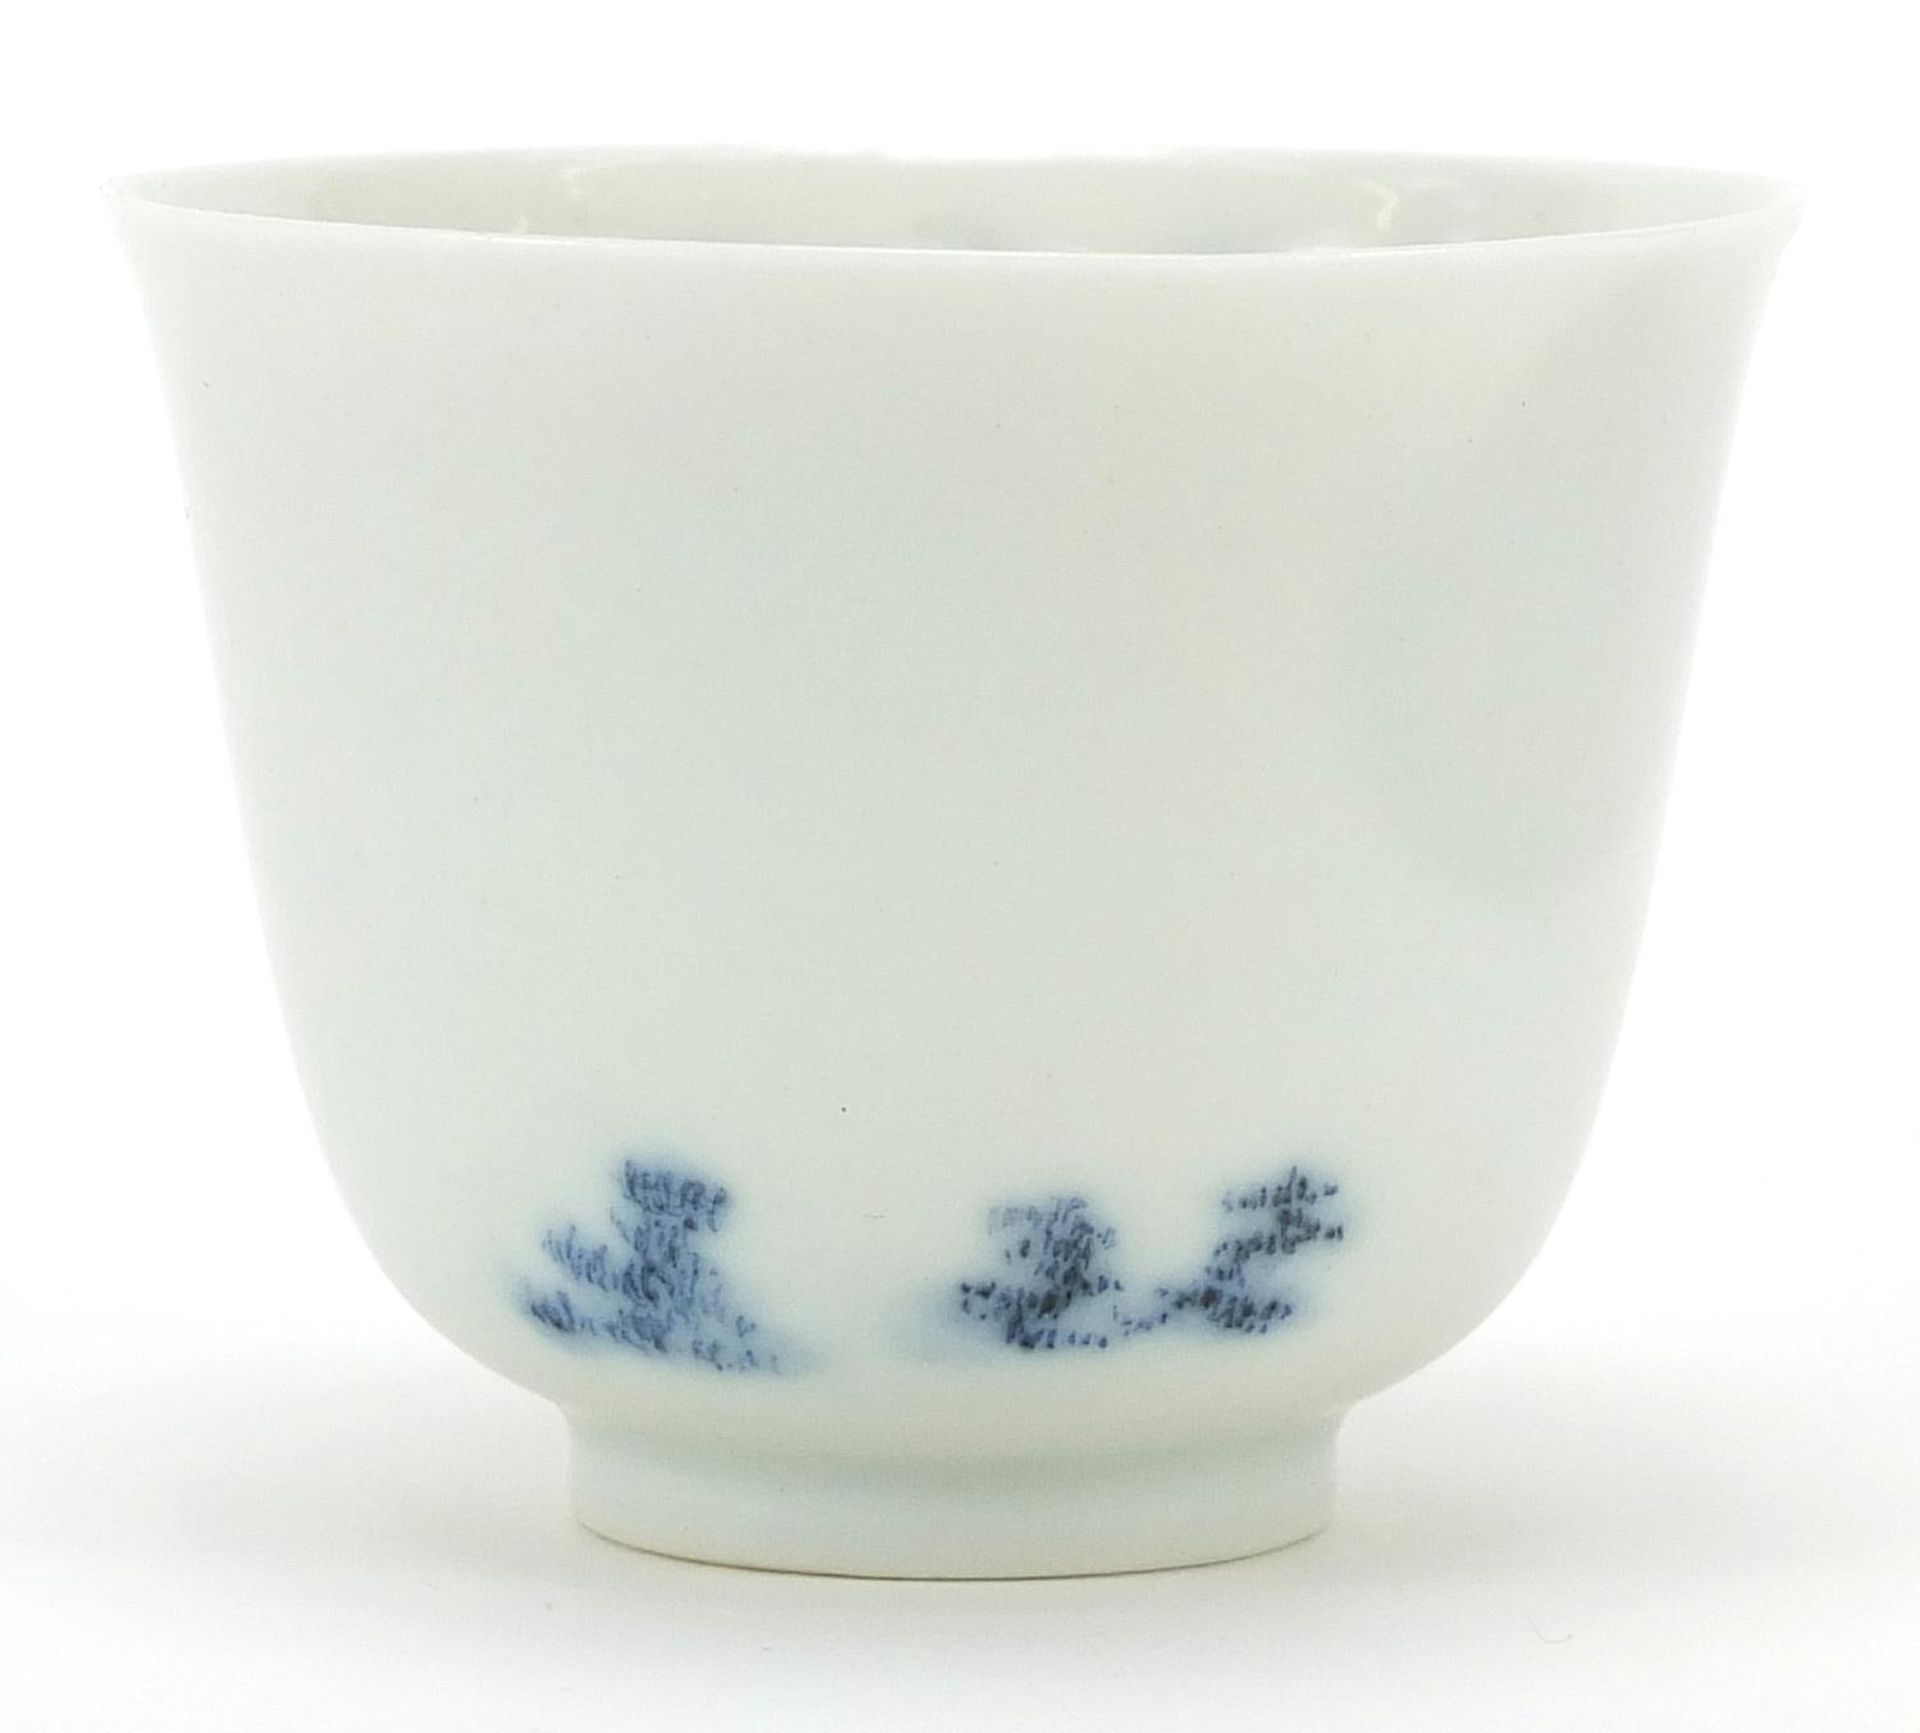 Chinese blue and white porcelain tea bowl hand painted with calligraphy, six figure character